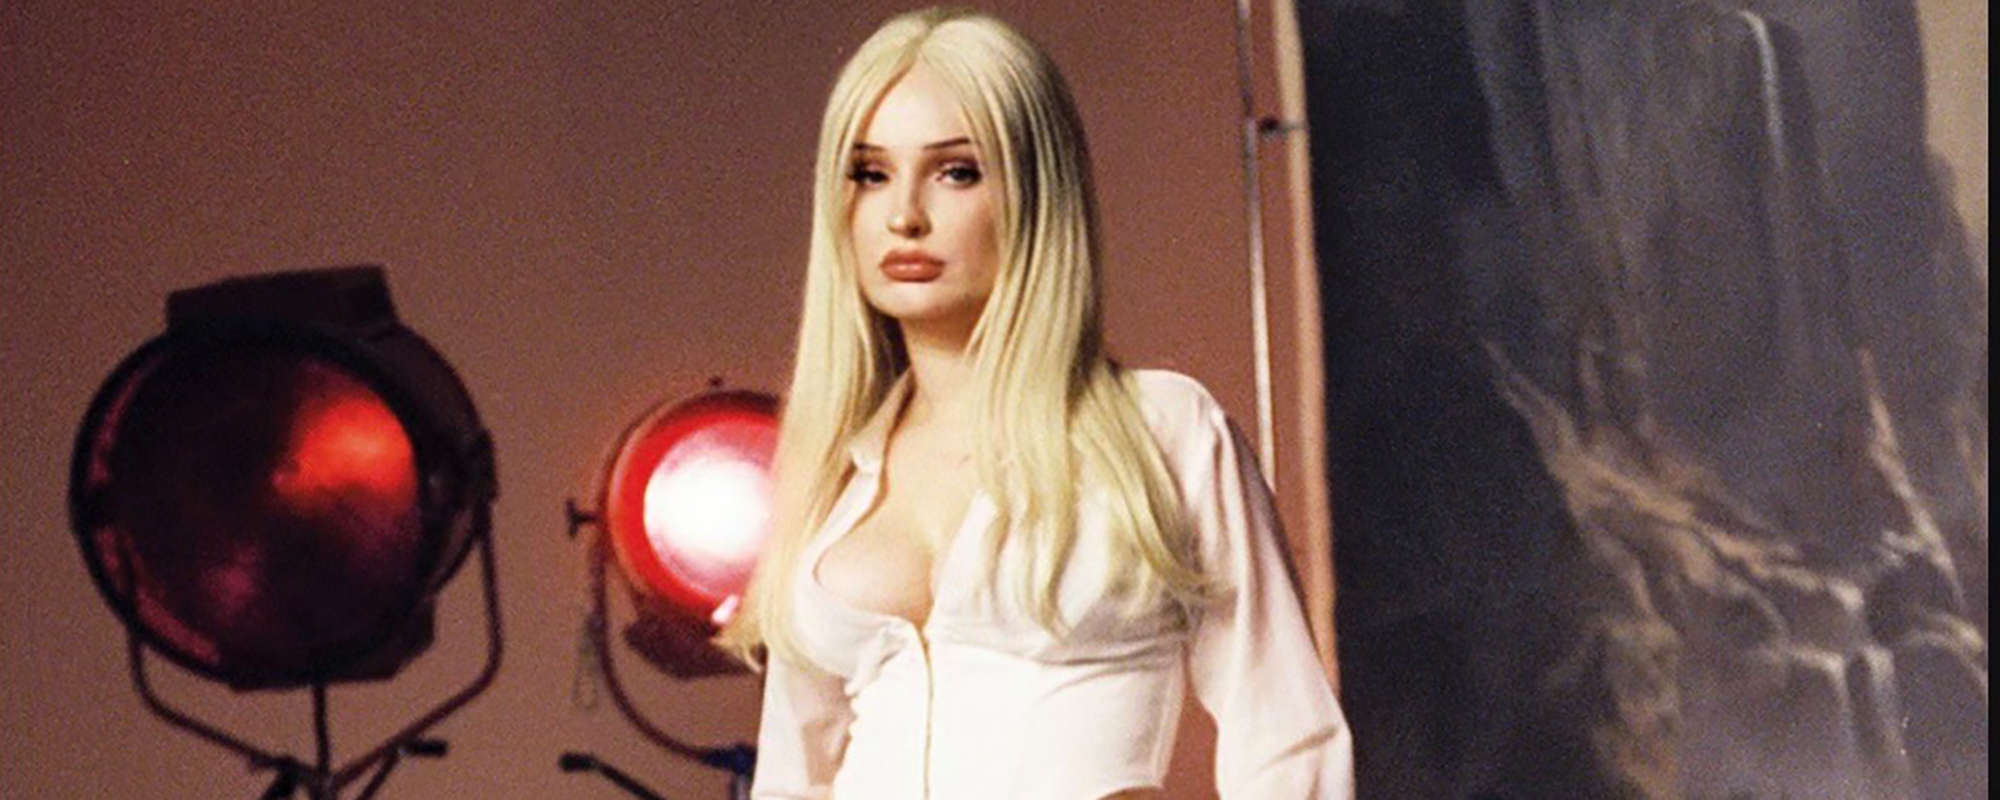 Kim Petras Gives “Claws” the Symphonic Treatment in New Video